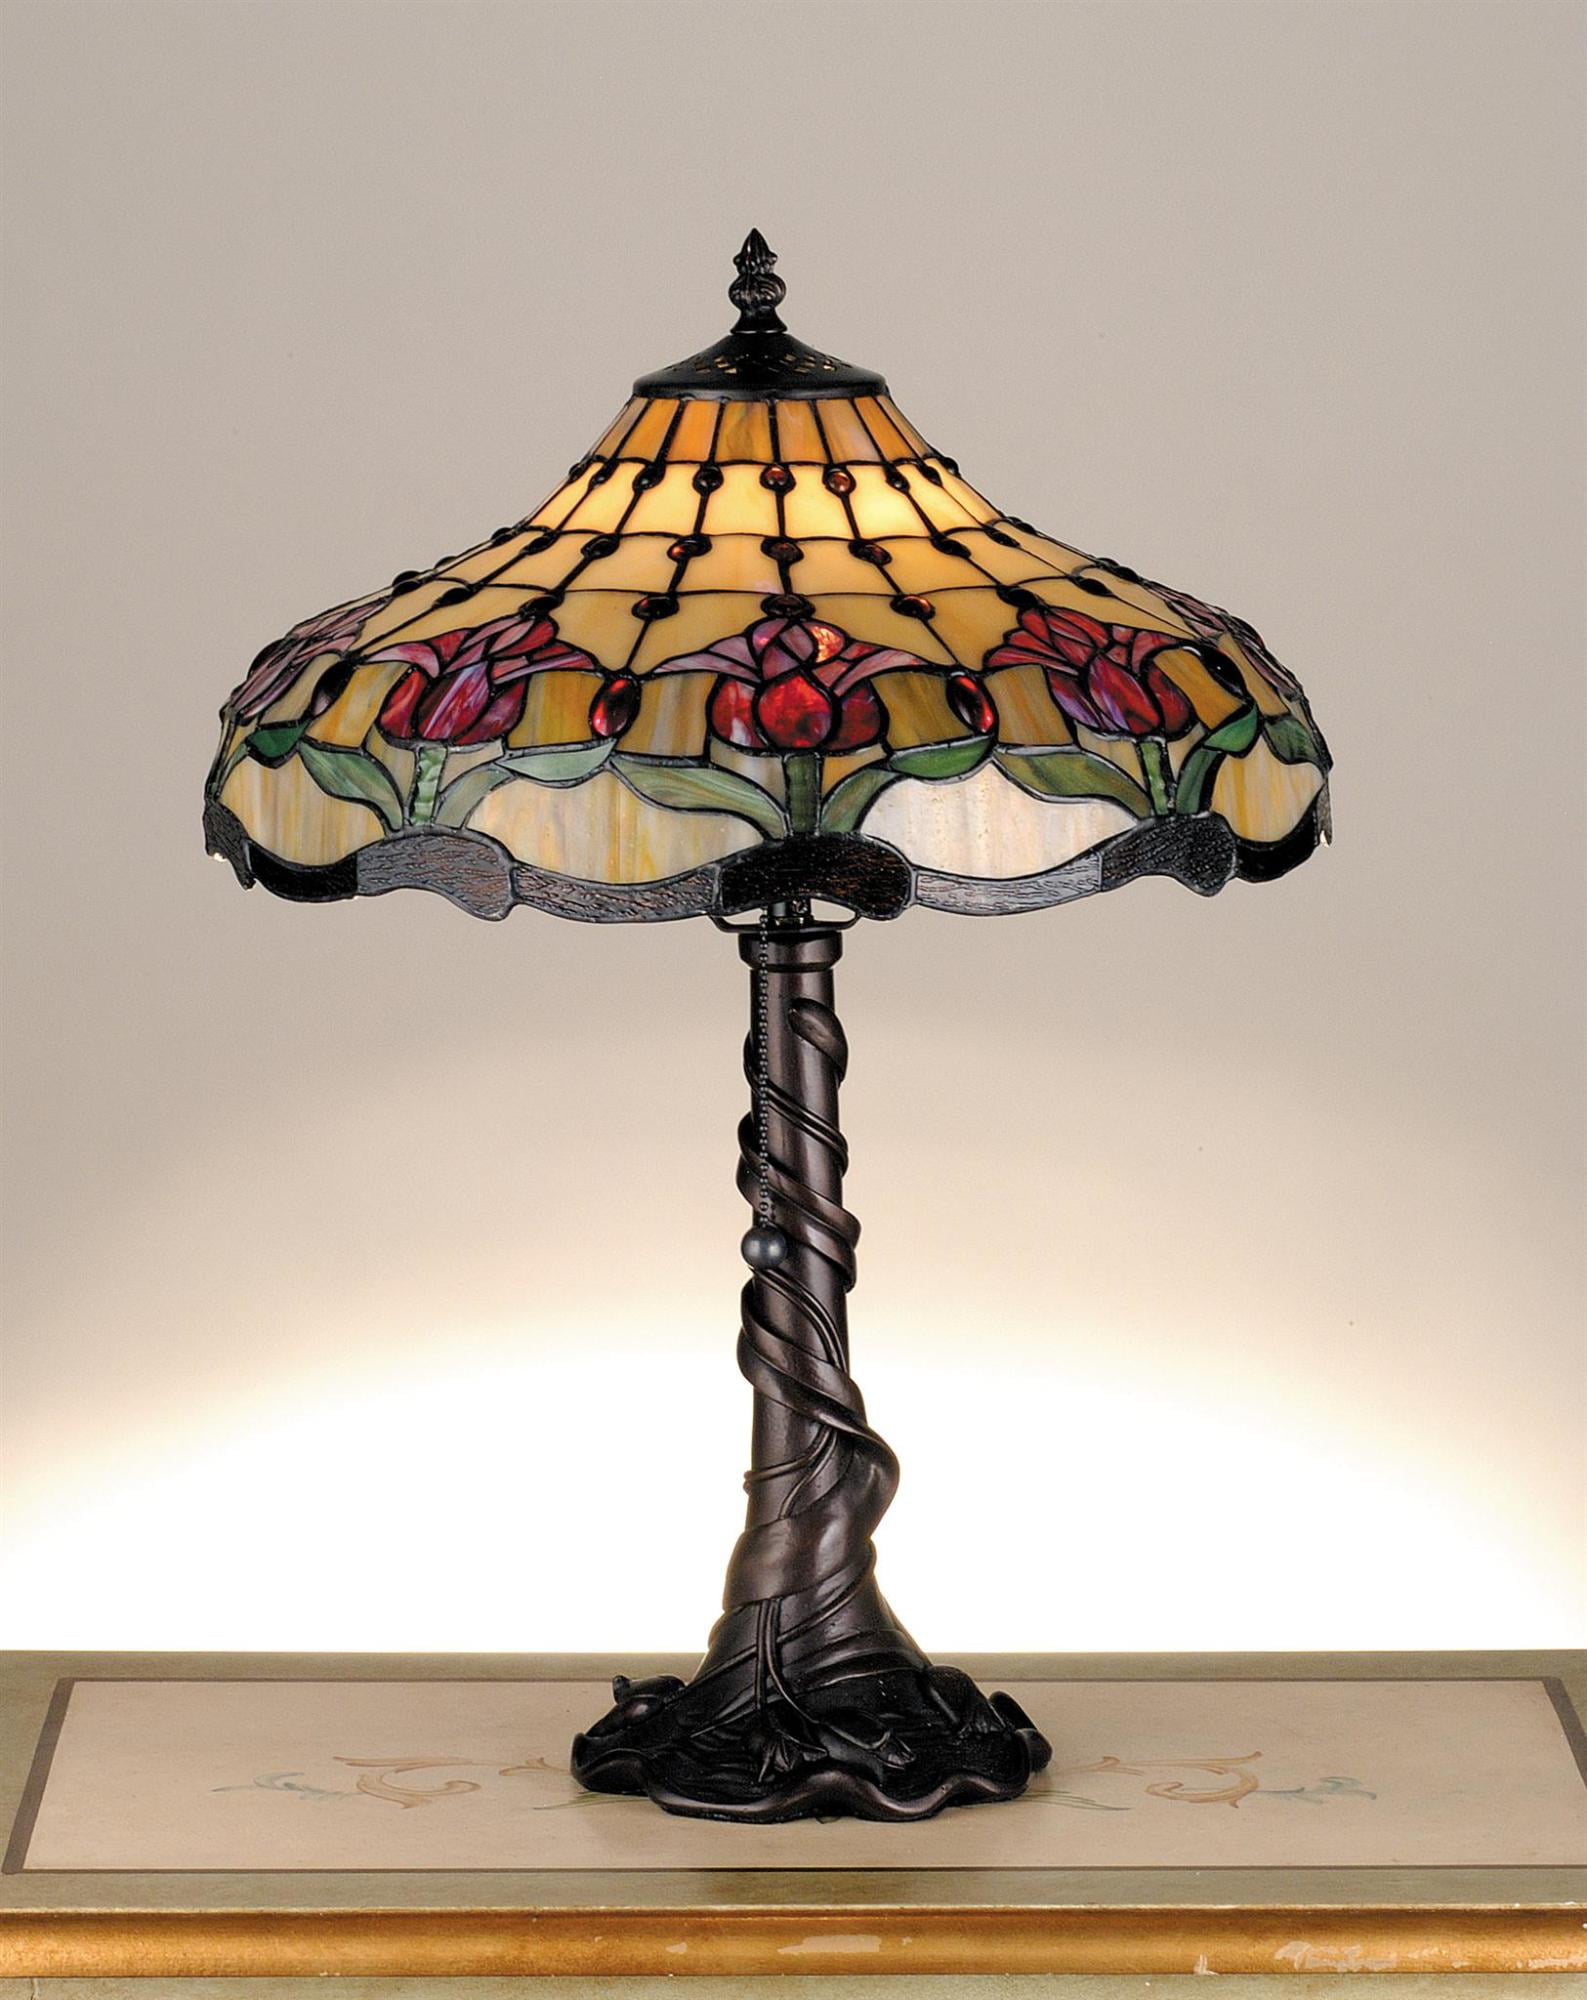 19.5"H Colonial Tulip Table Lamp